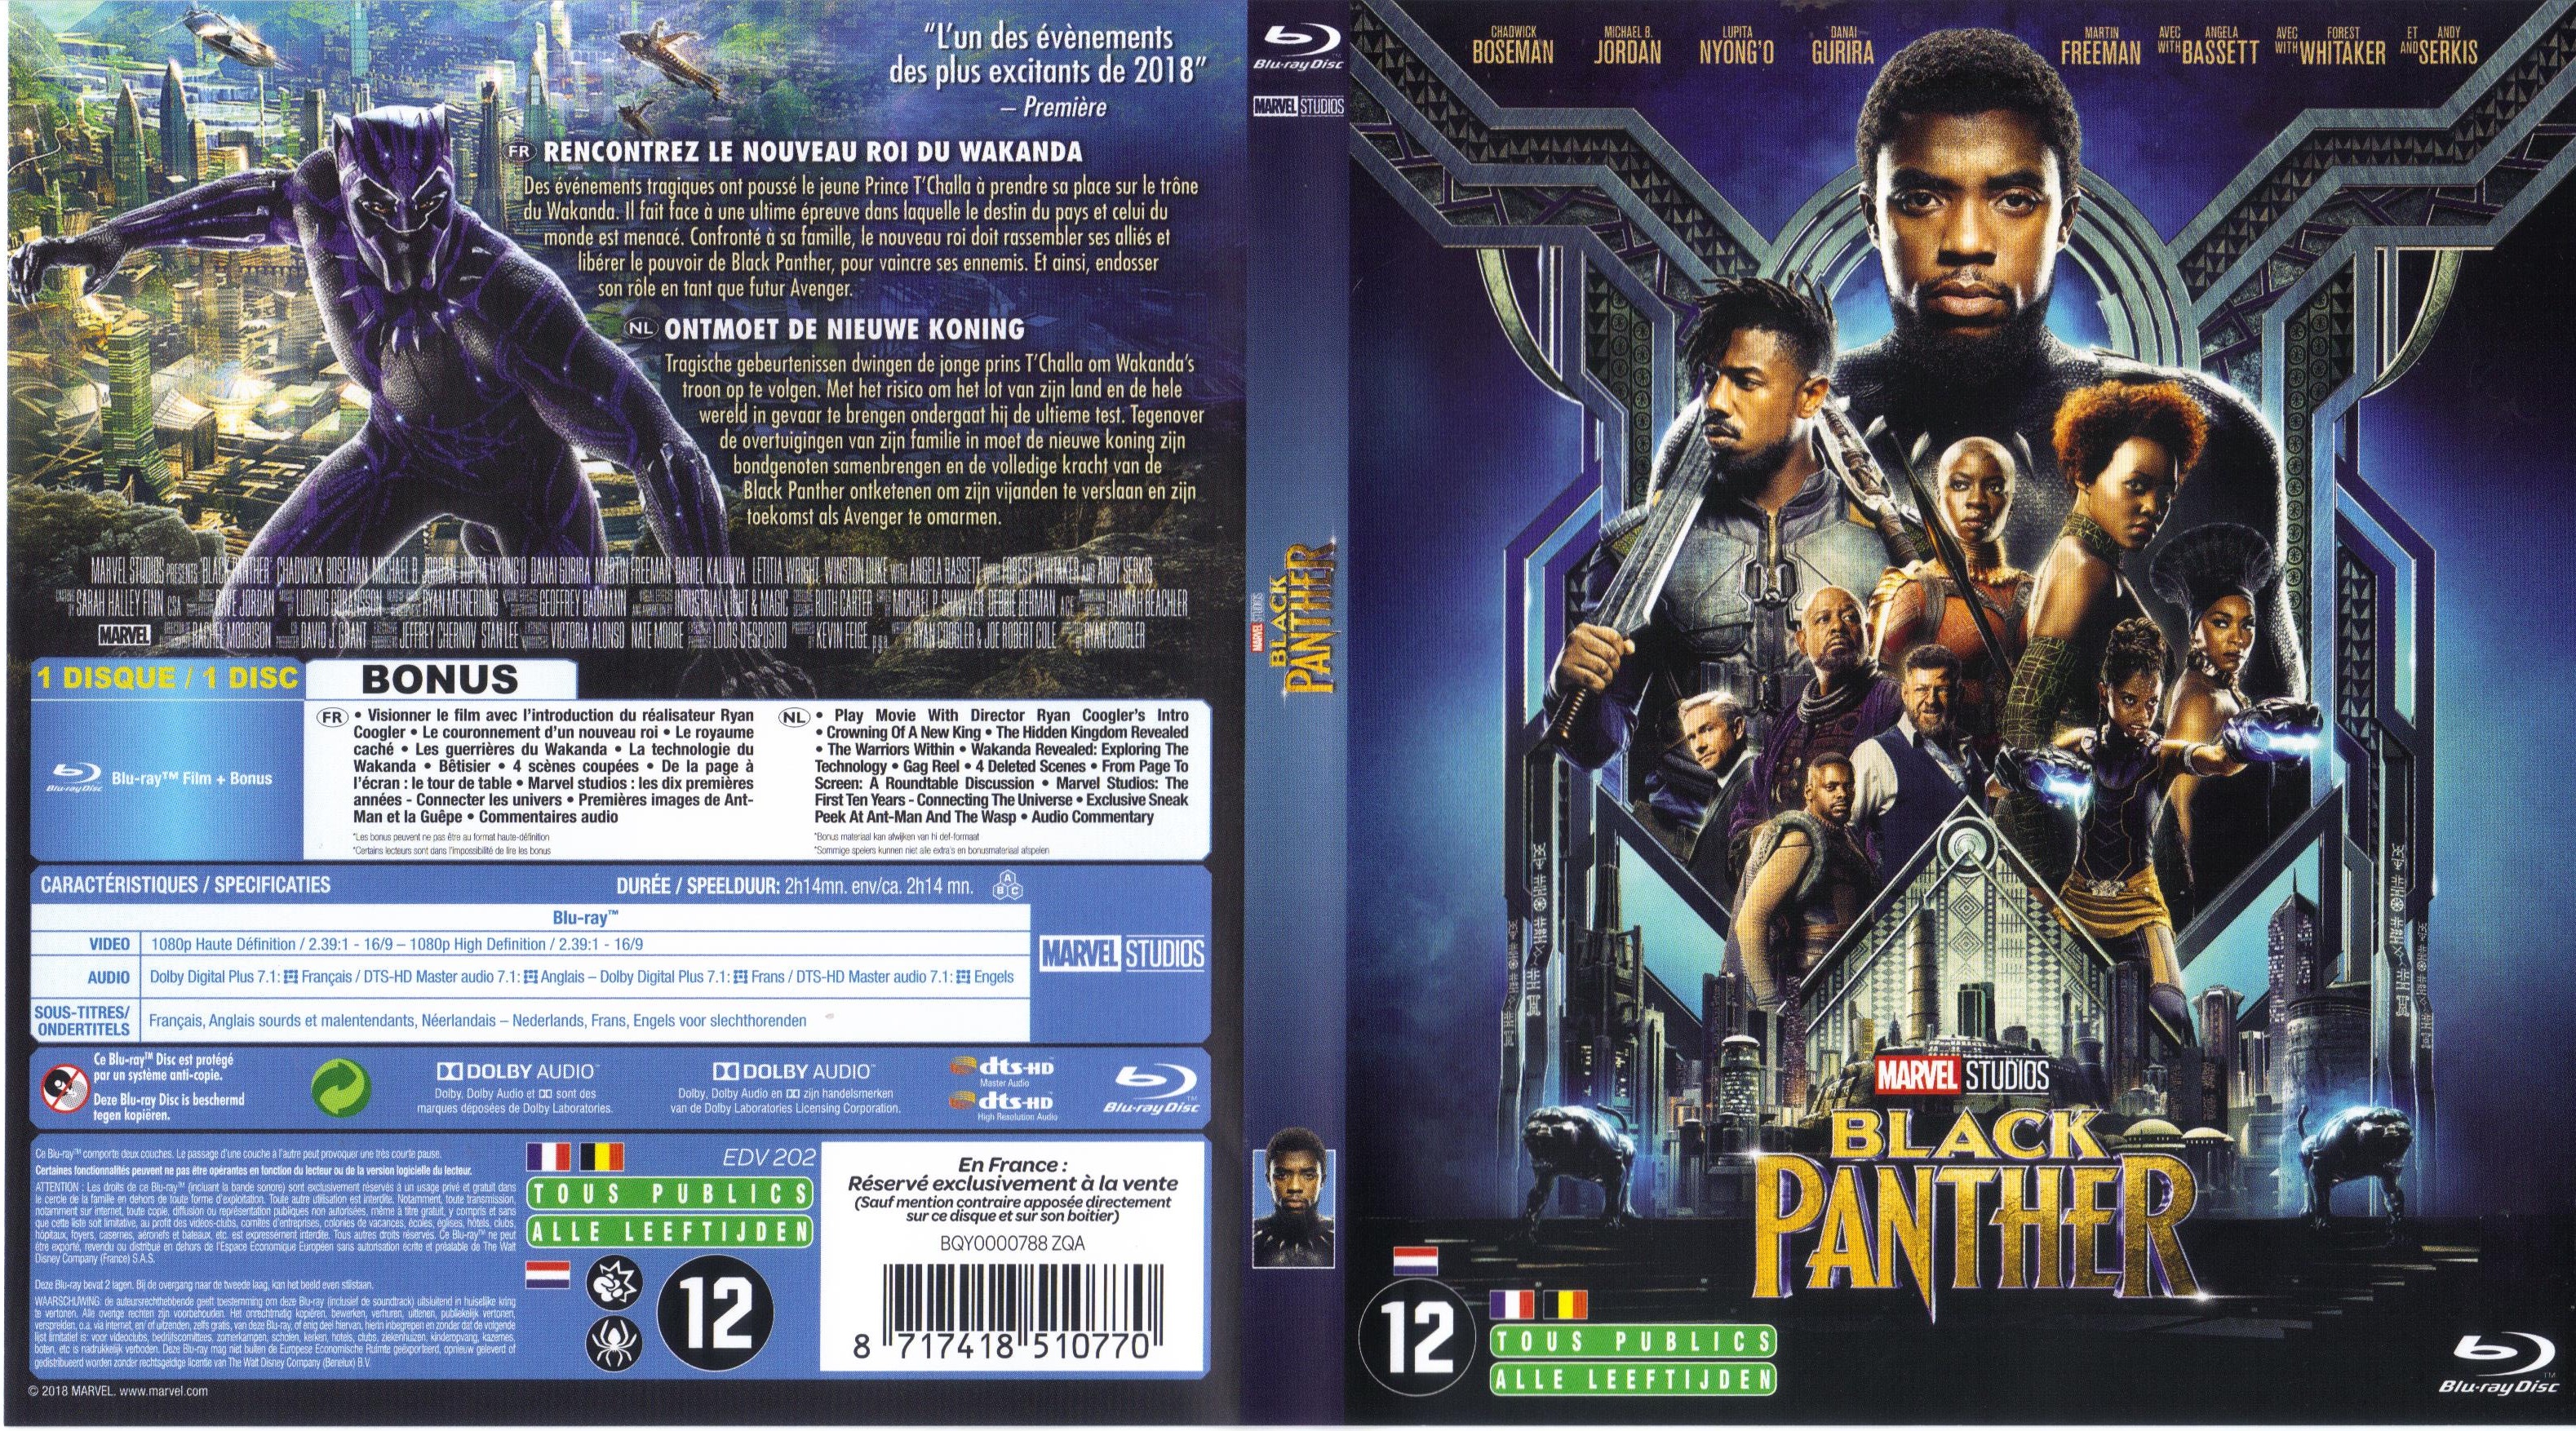 Jaquette DVD Black panther (BLIU-RAY)